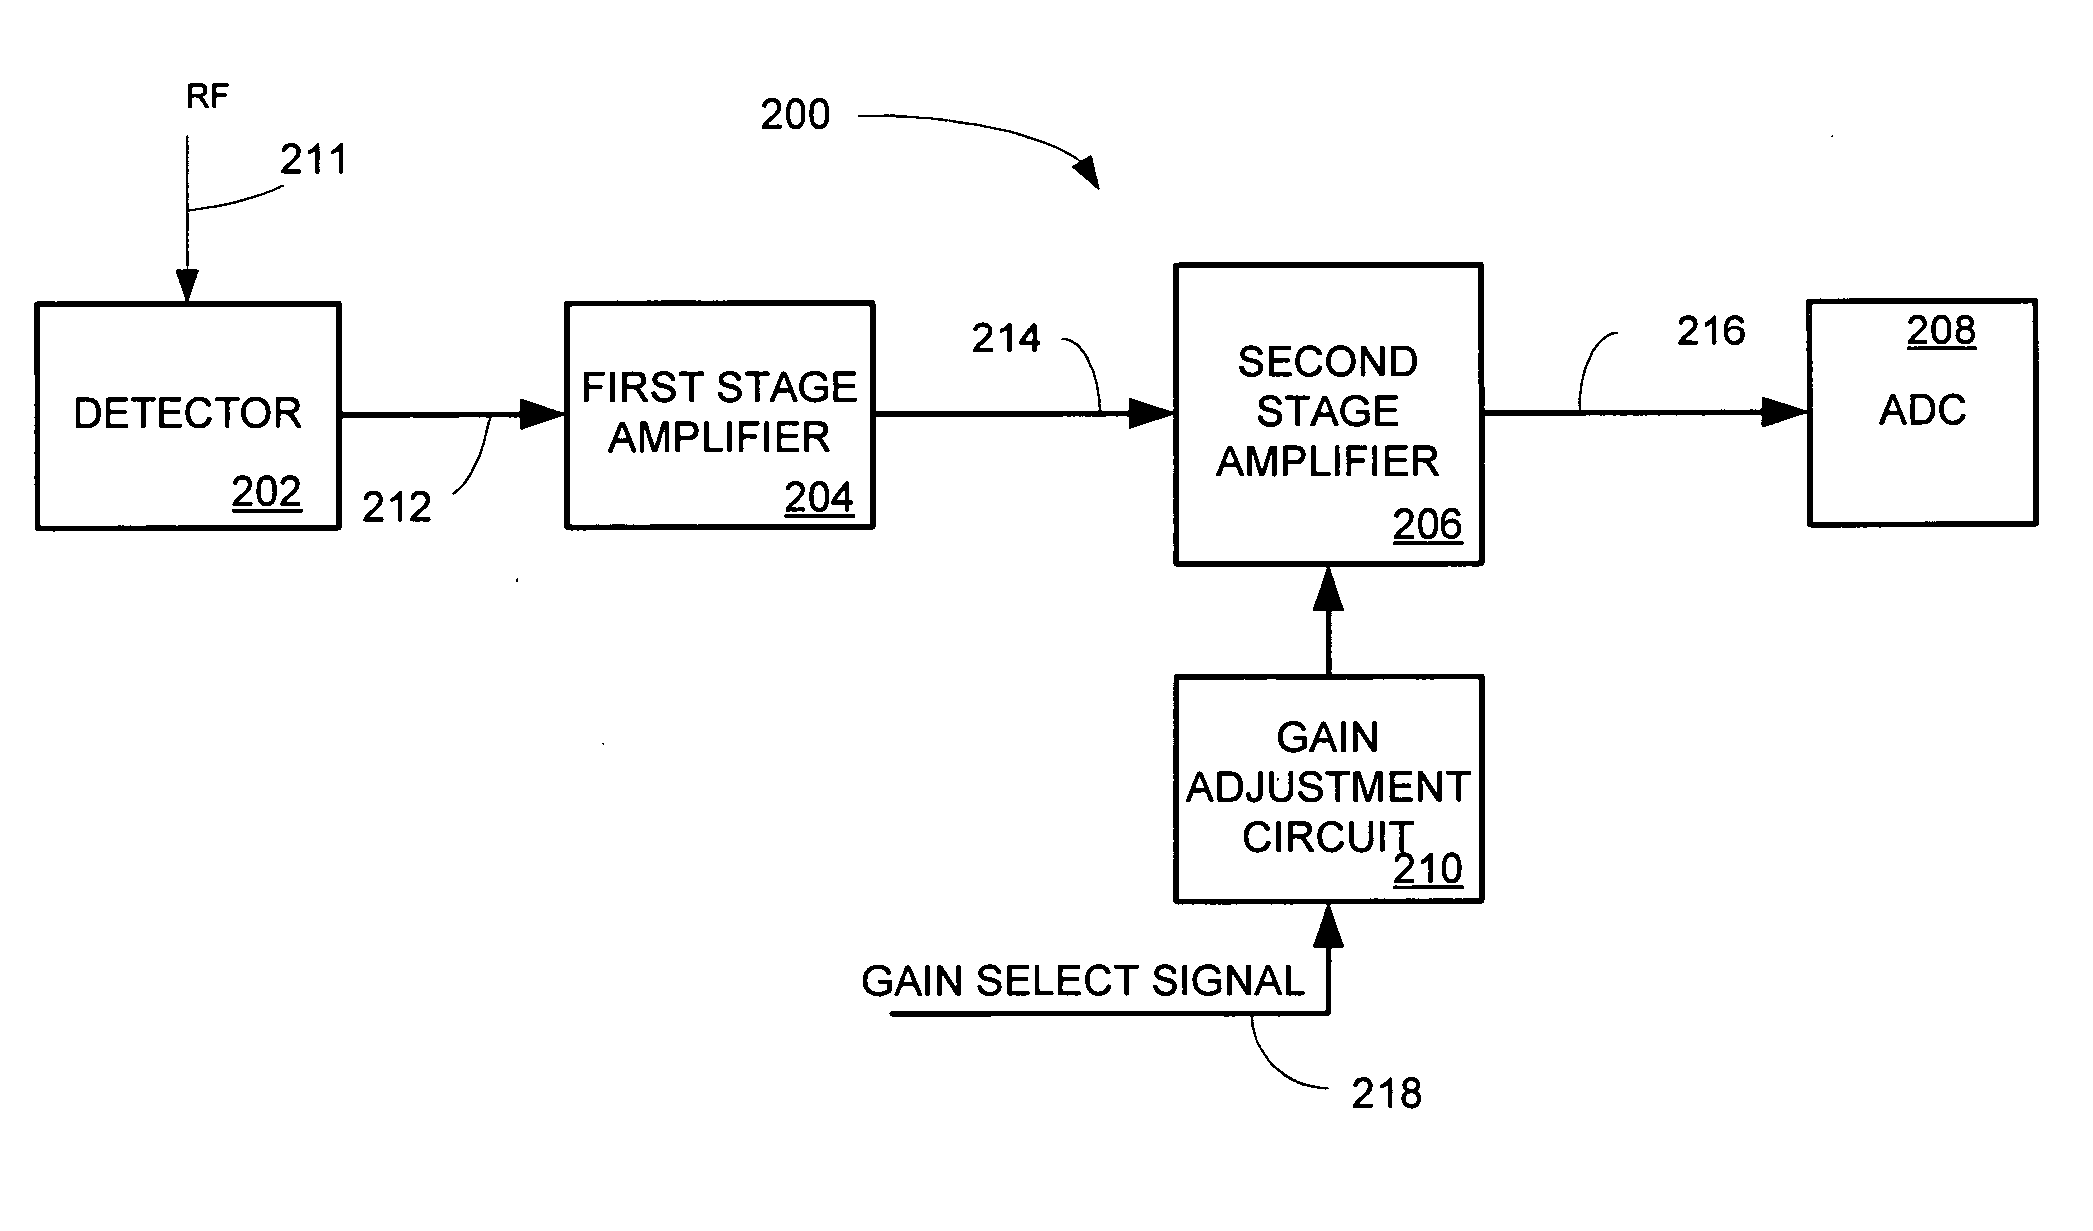 System and method for increasing accuracy of transmitter power detection over a larger range of output power levels